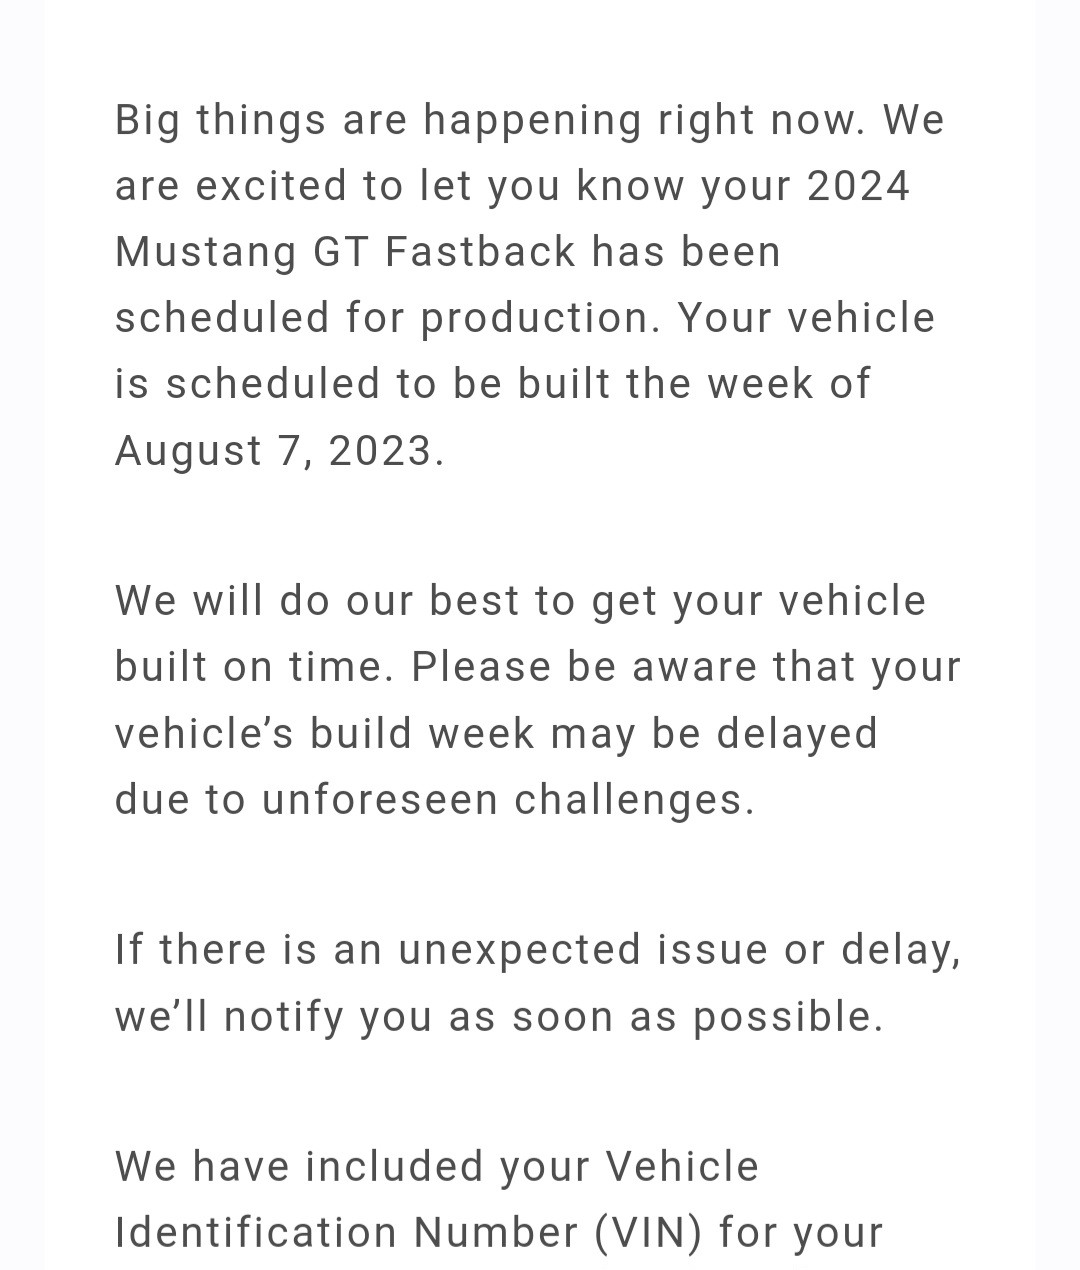 S650 Mustang It begins! Scheduled today for Aug 7 Screenshot_20230615_100548_Gmail